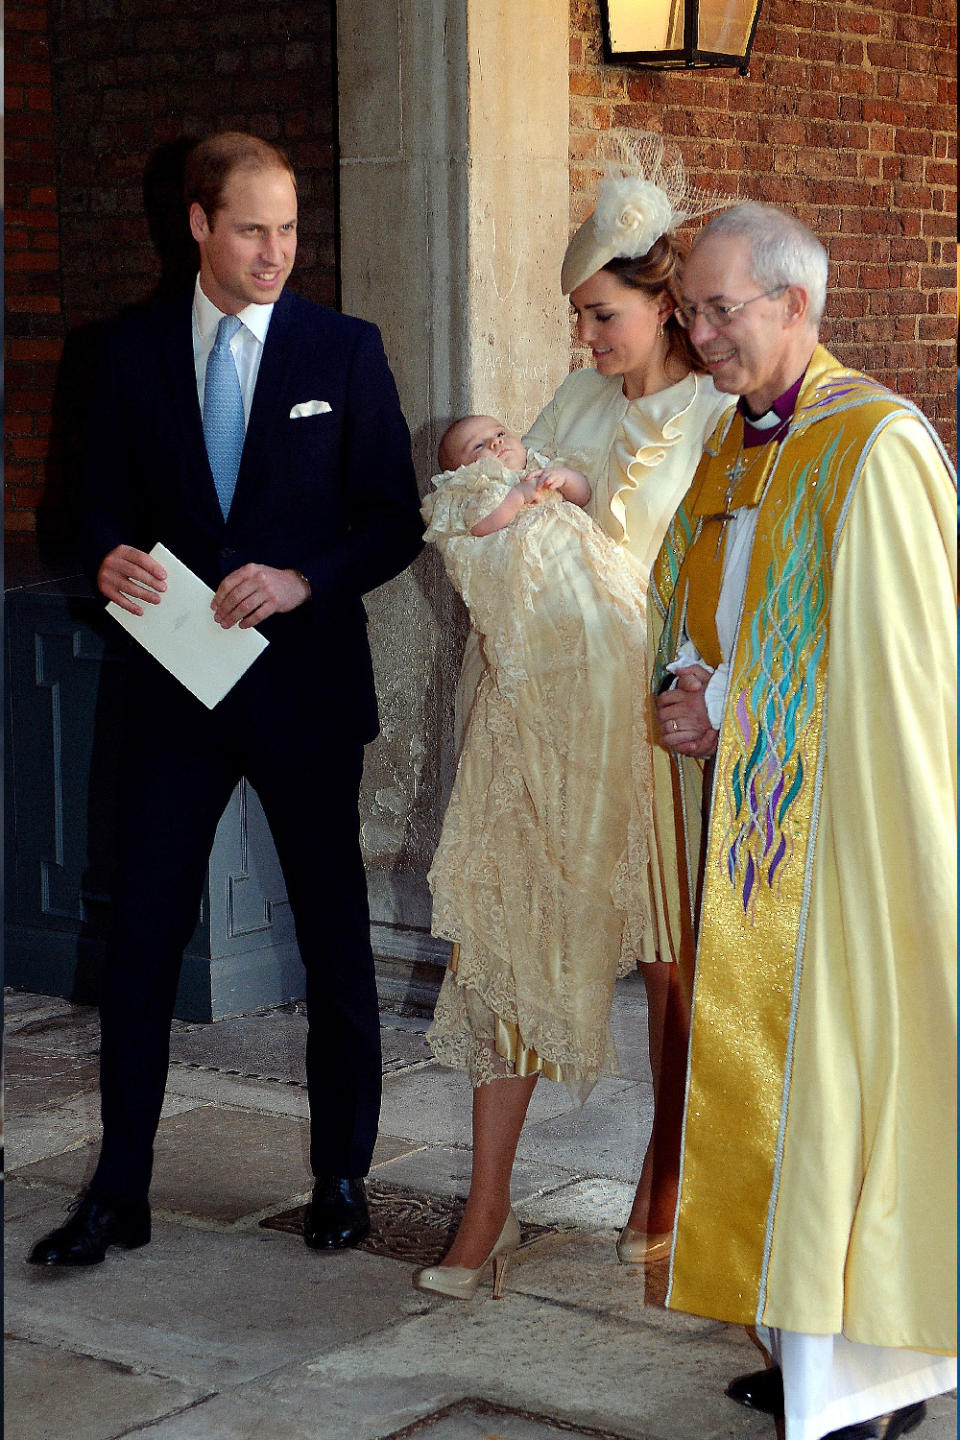 Royal babies are baptised with sacred water